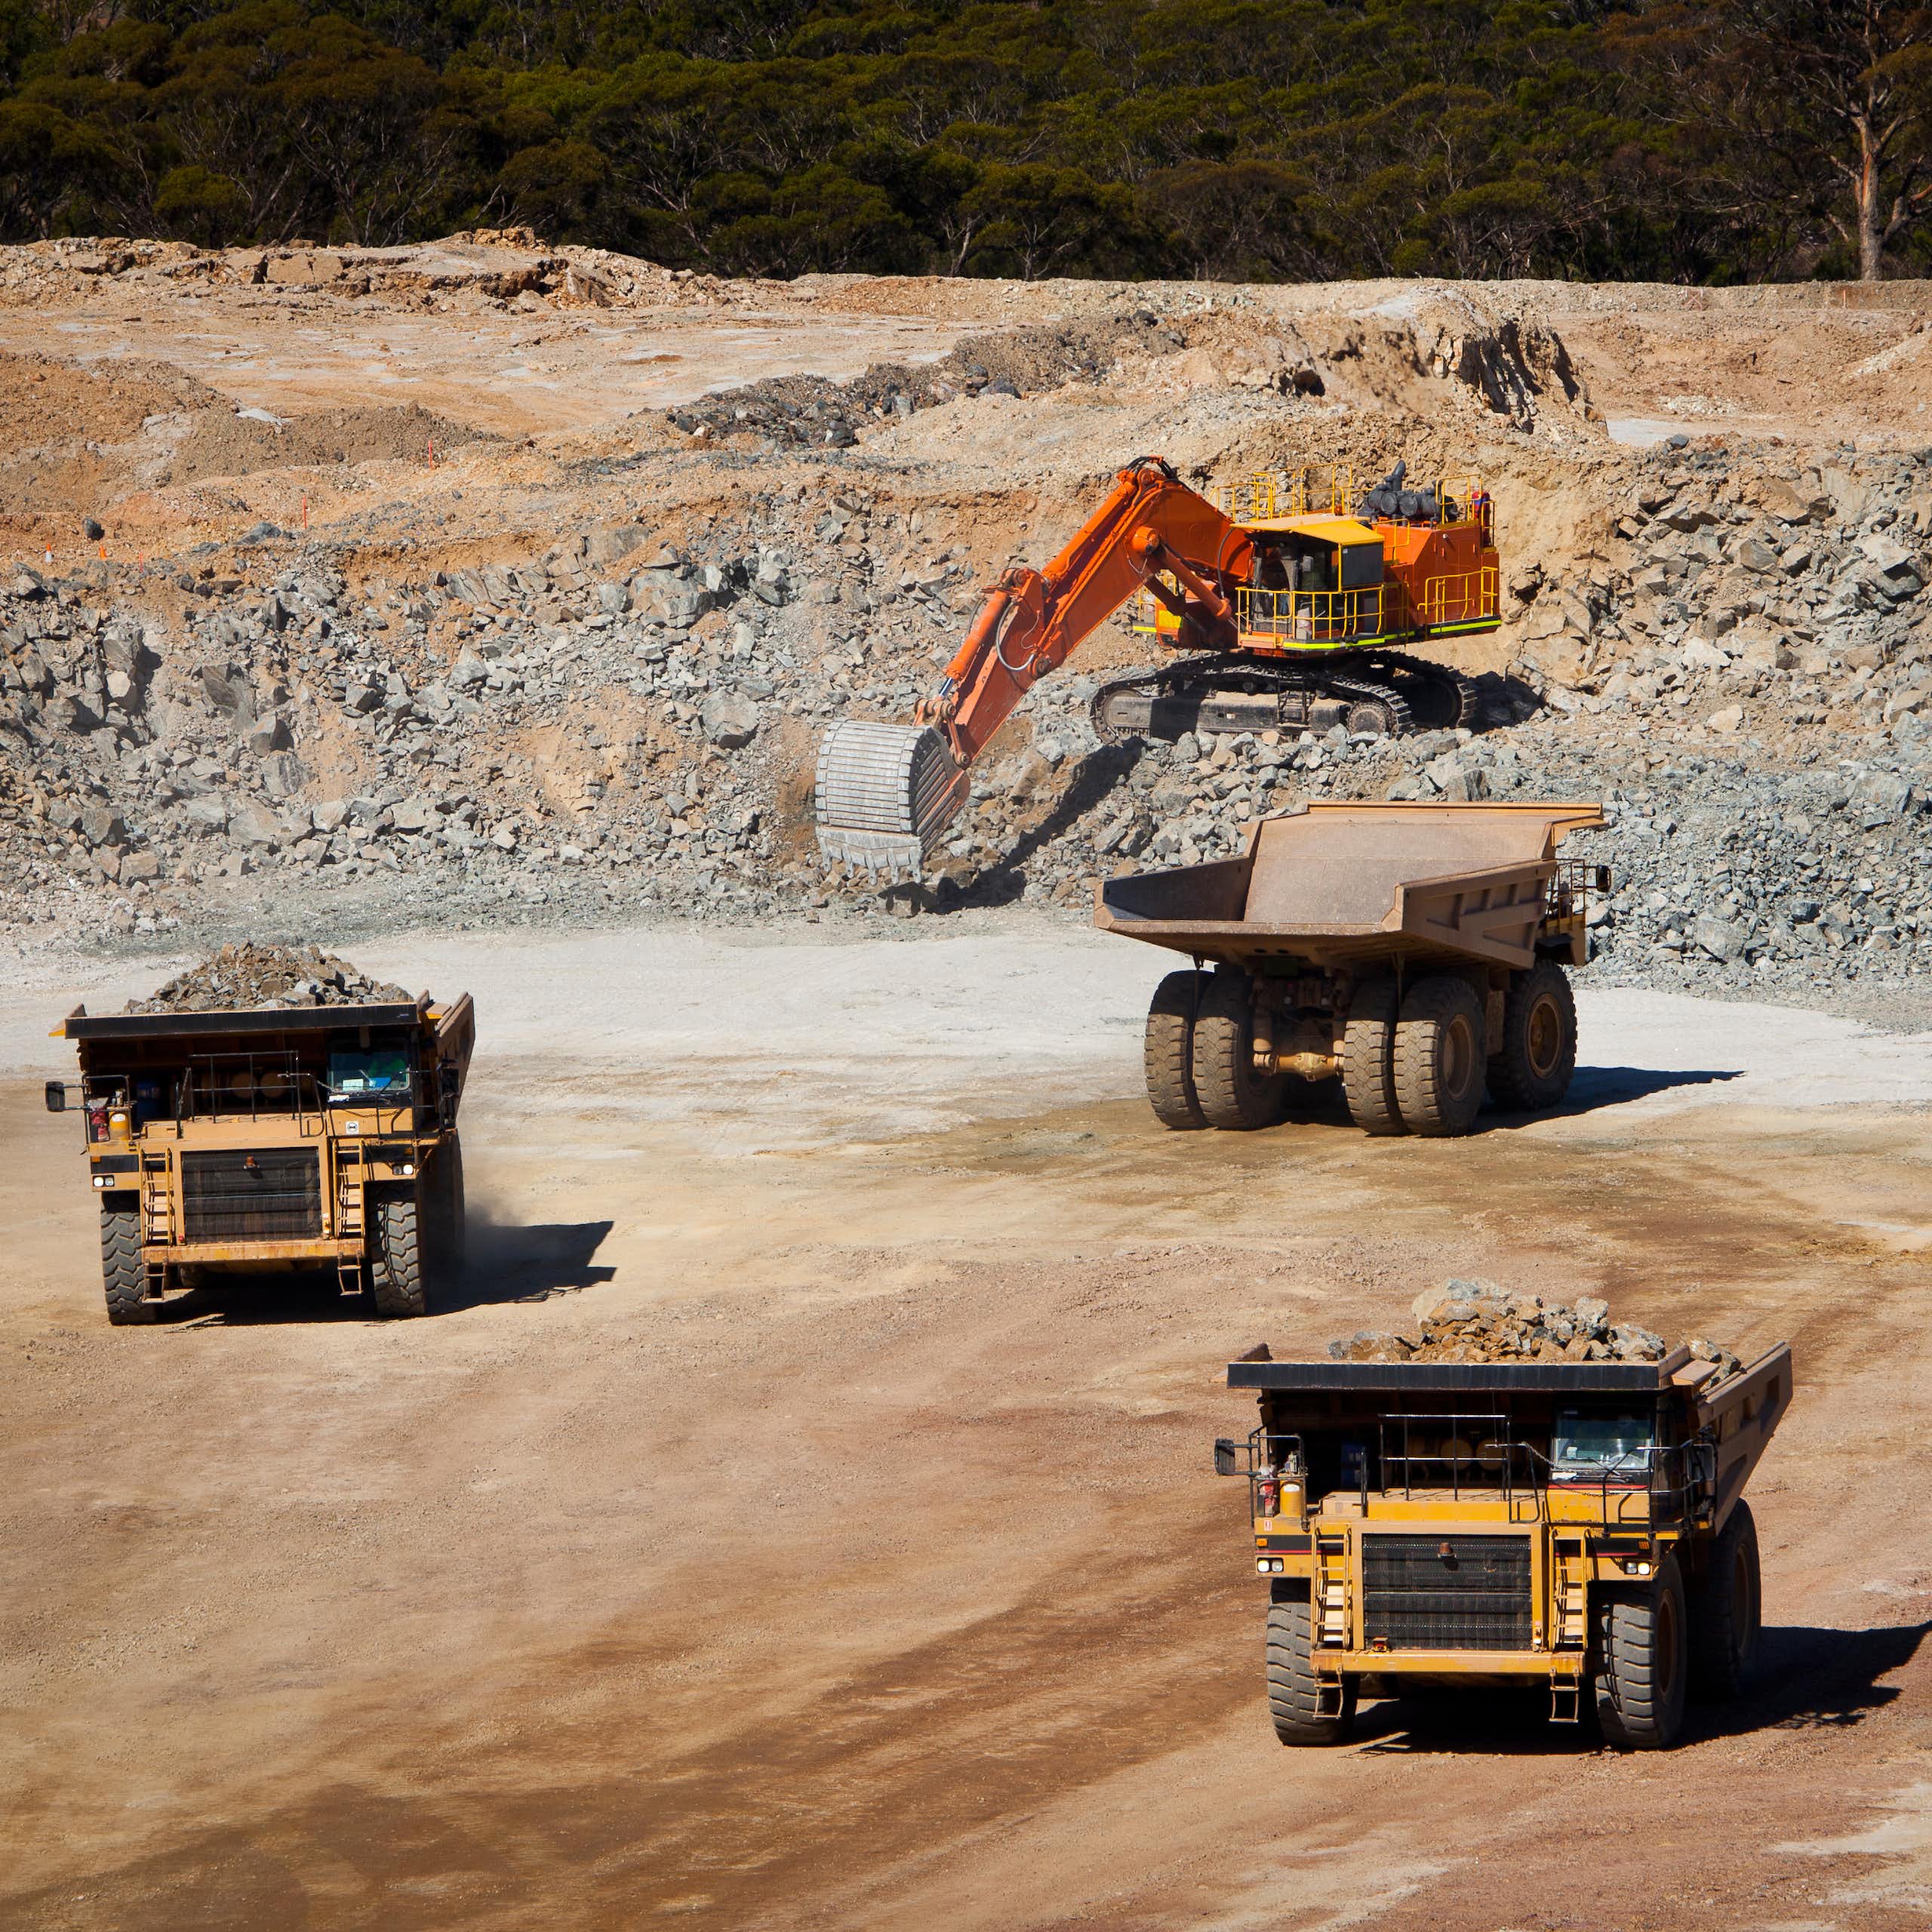 Trucks at an open cast mine with digger in background